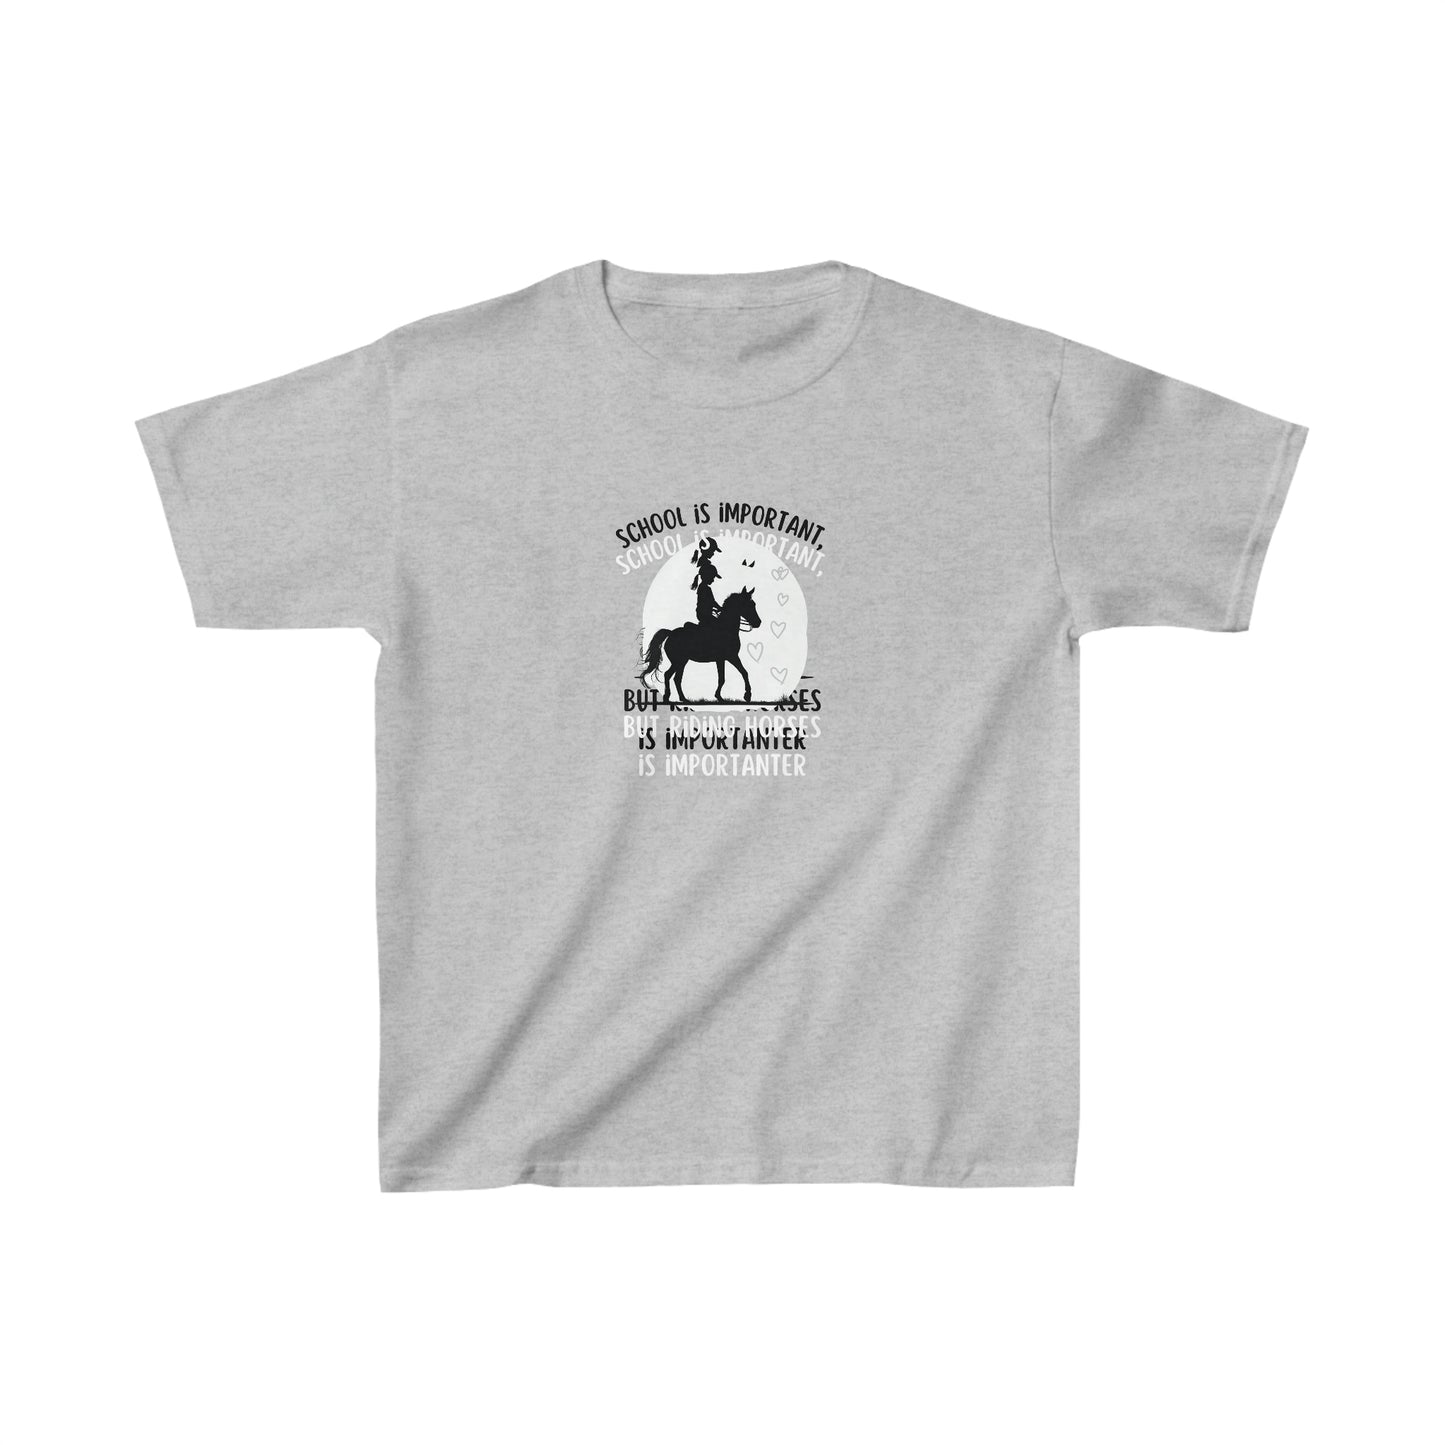 School is important, but riding horses is importanter kids' T-shirt